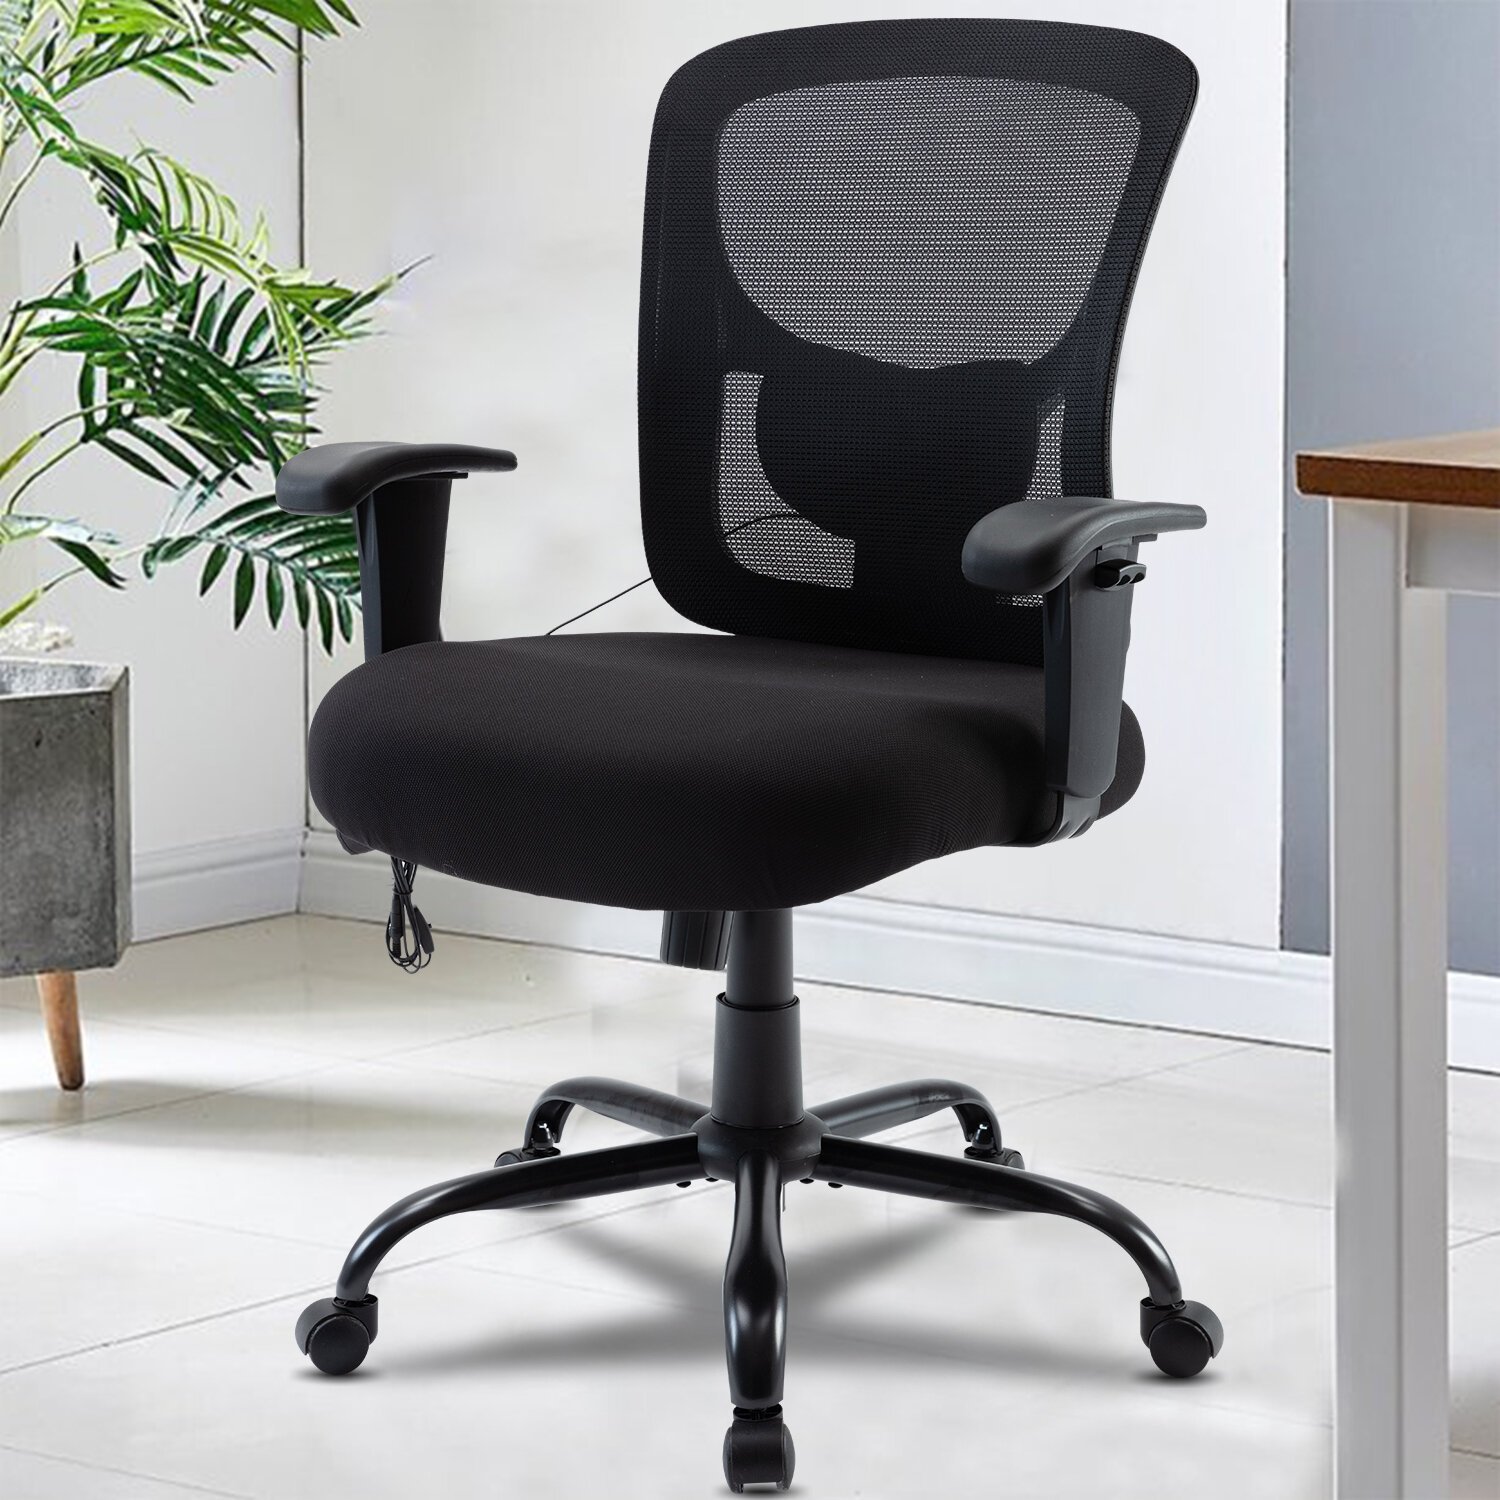 BestOffice Big and Tall Office Chair 400lbs Desk Chair Mesh Computer Chair with Lumbar Support Wide Seat Adjust Arms Rolling Swivel High Back Task